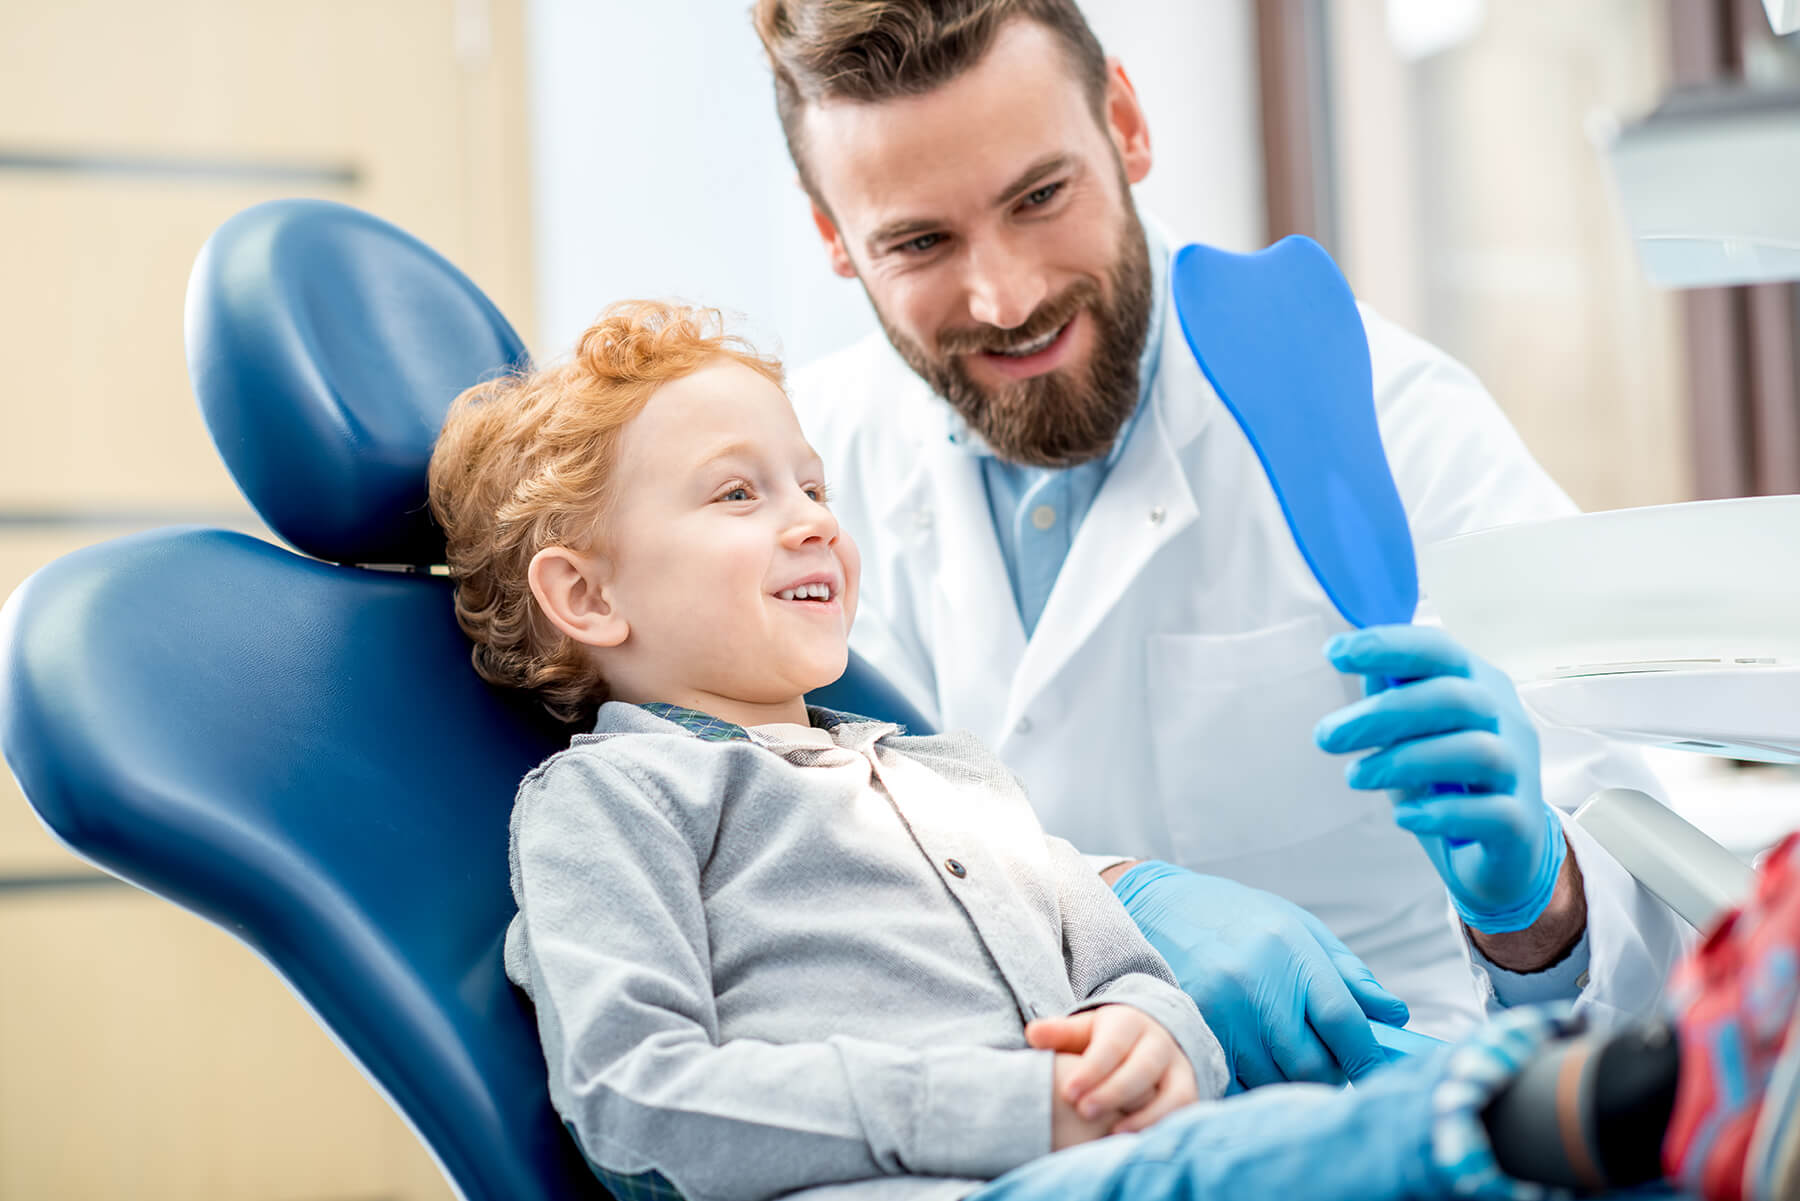 Young boy sits in dental chair and looks in dental mirror